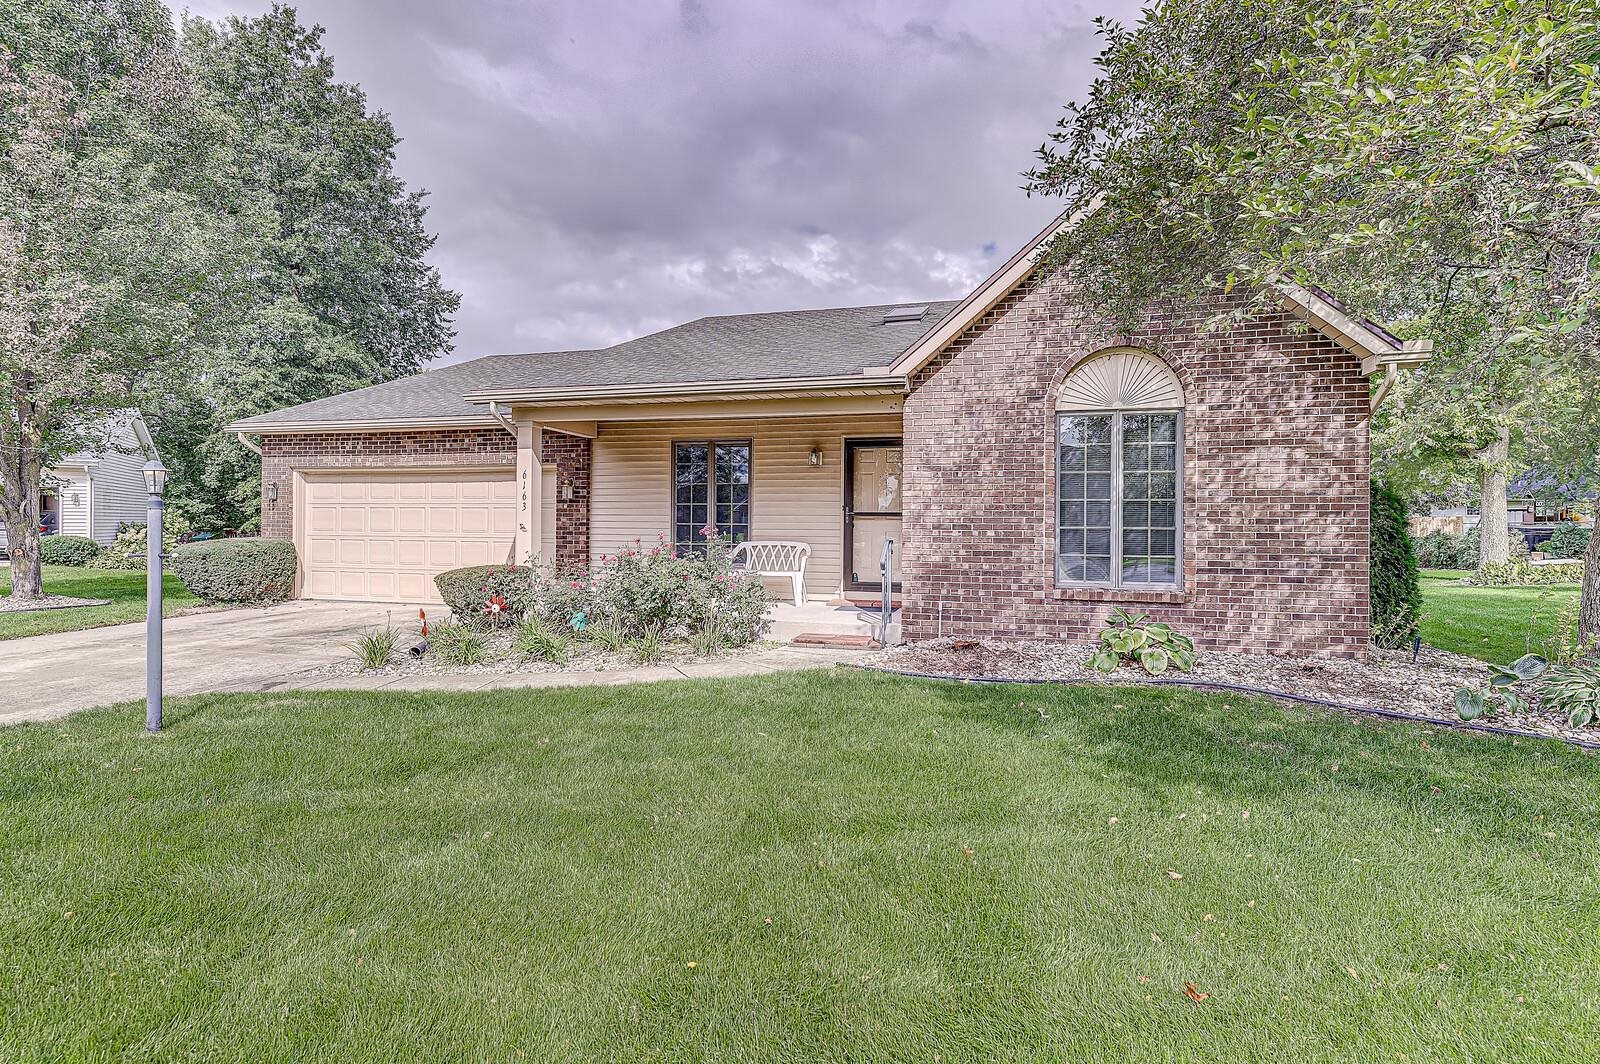 6163 Darby Court, South Bend, IN 46614